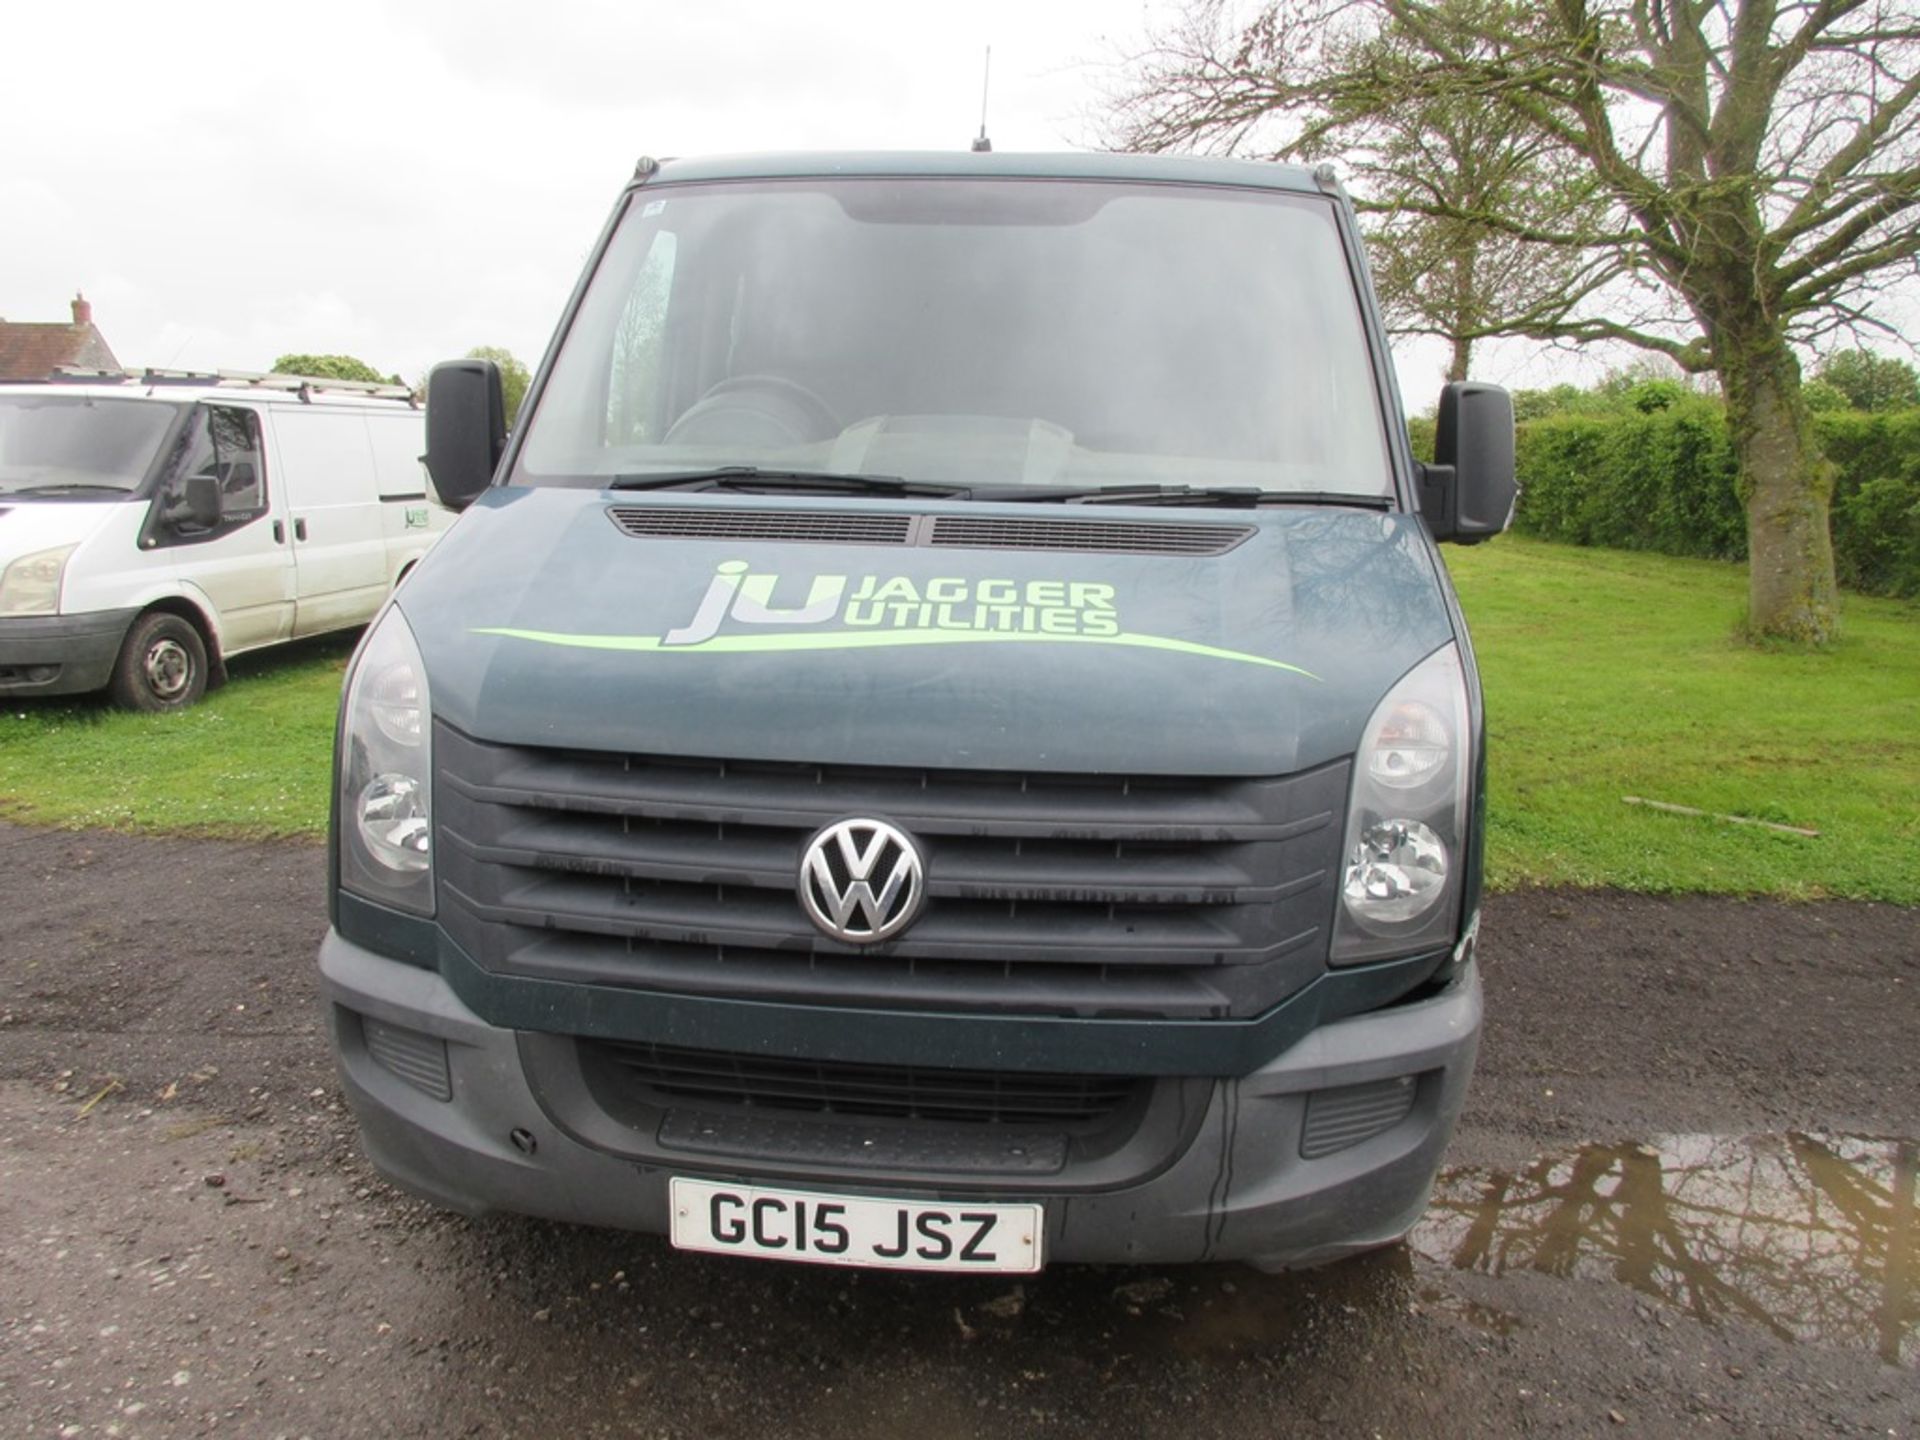 Volkswagen Crafter CR35 2.0 TDI LWB dropside, 107bhp (13/08/2015) - Image 3 of 19